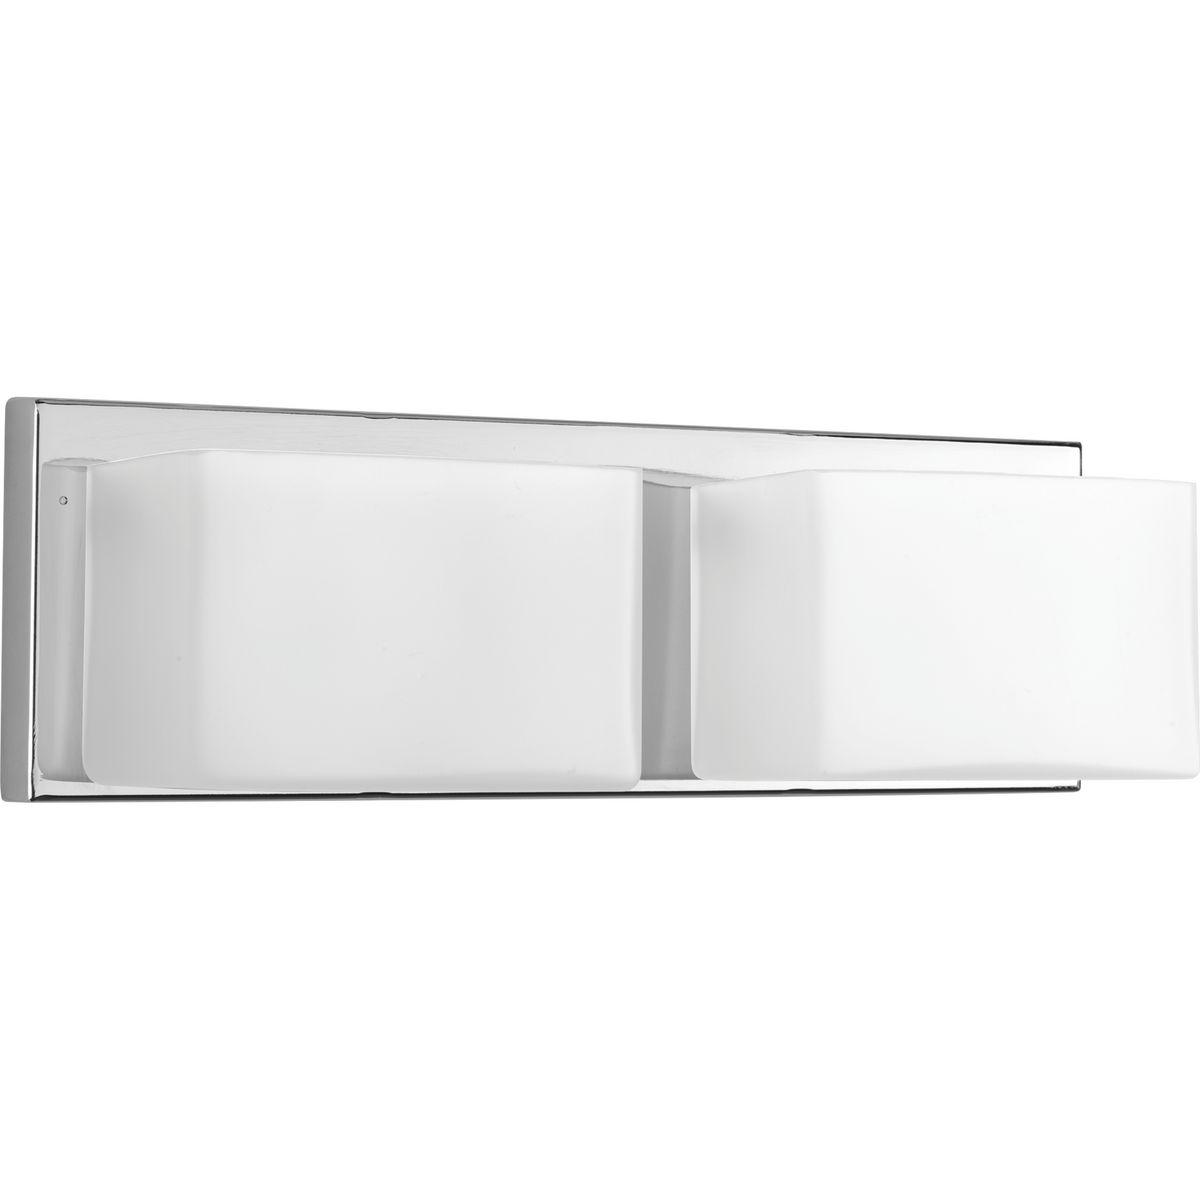 Hubbell P2143-1530K9 Two-Light LED modern wall fixture in Polished Chrome with geometric frosted glass shades and a replaceable LED module. This modern fixture is perfect for the bathroom. 3000K color temperature and 90 plus CRI.  ; Ideal for a bathroom and powder room. ; Per